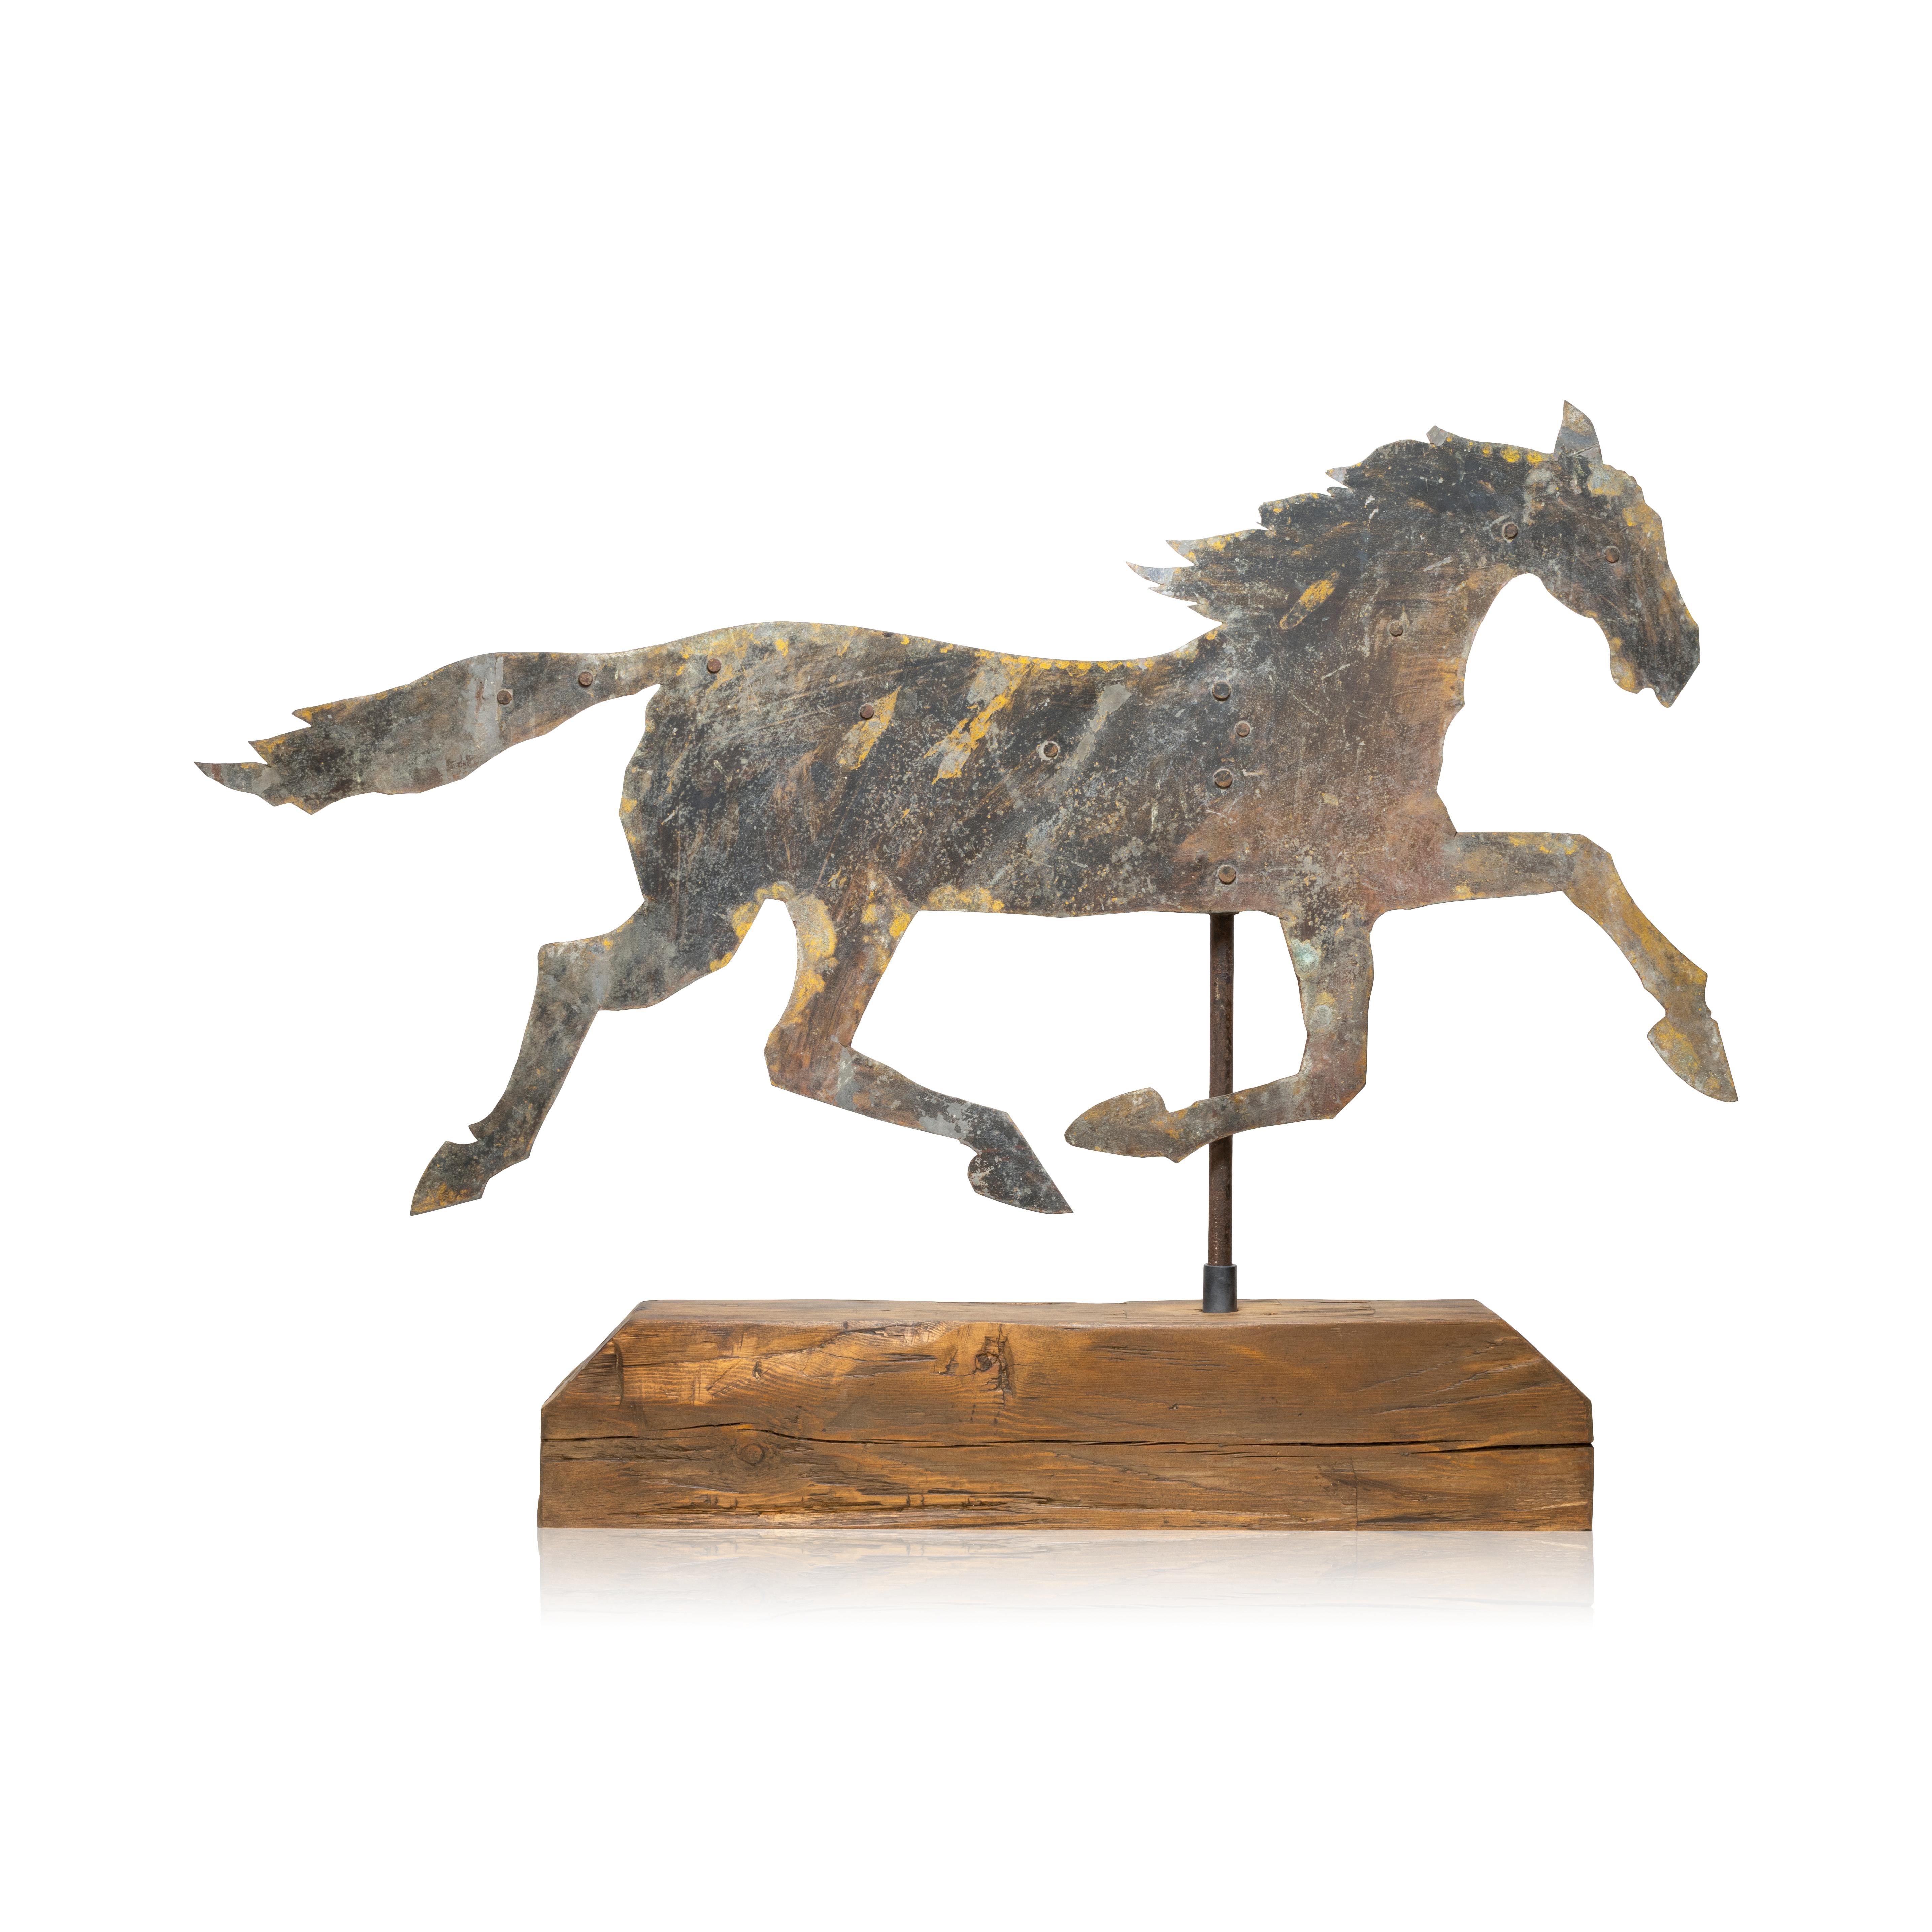 19th Century sheet iron silhouette horse weather vane with original iron mounting rod. Mounted on a more modern base. 32